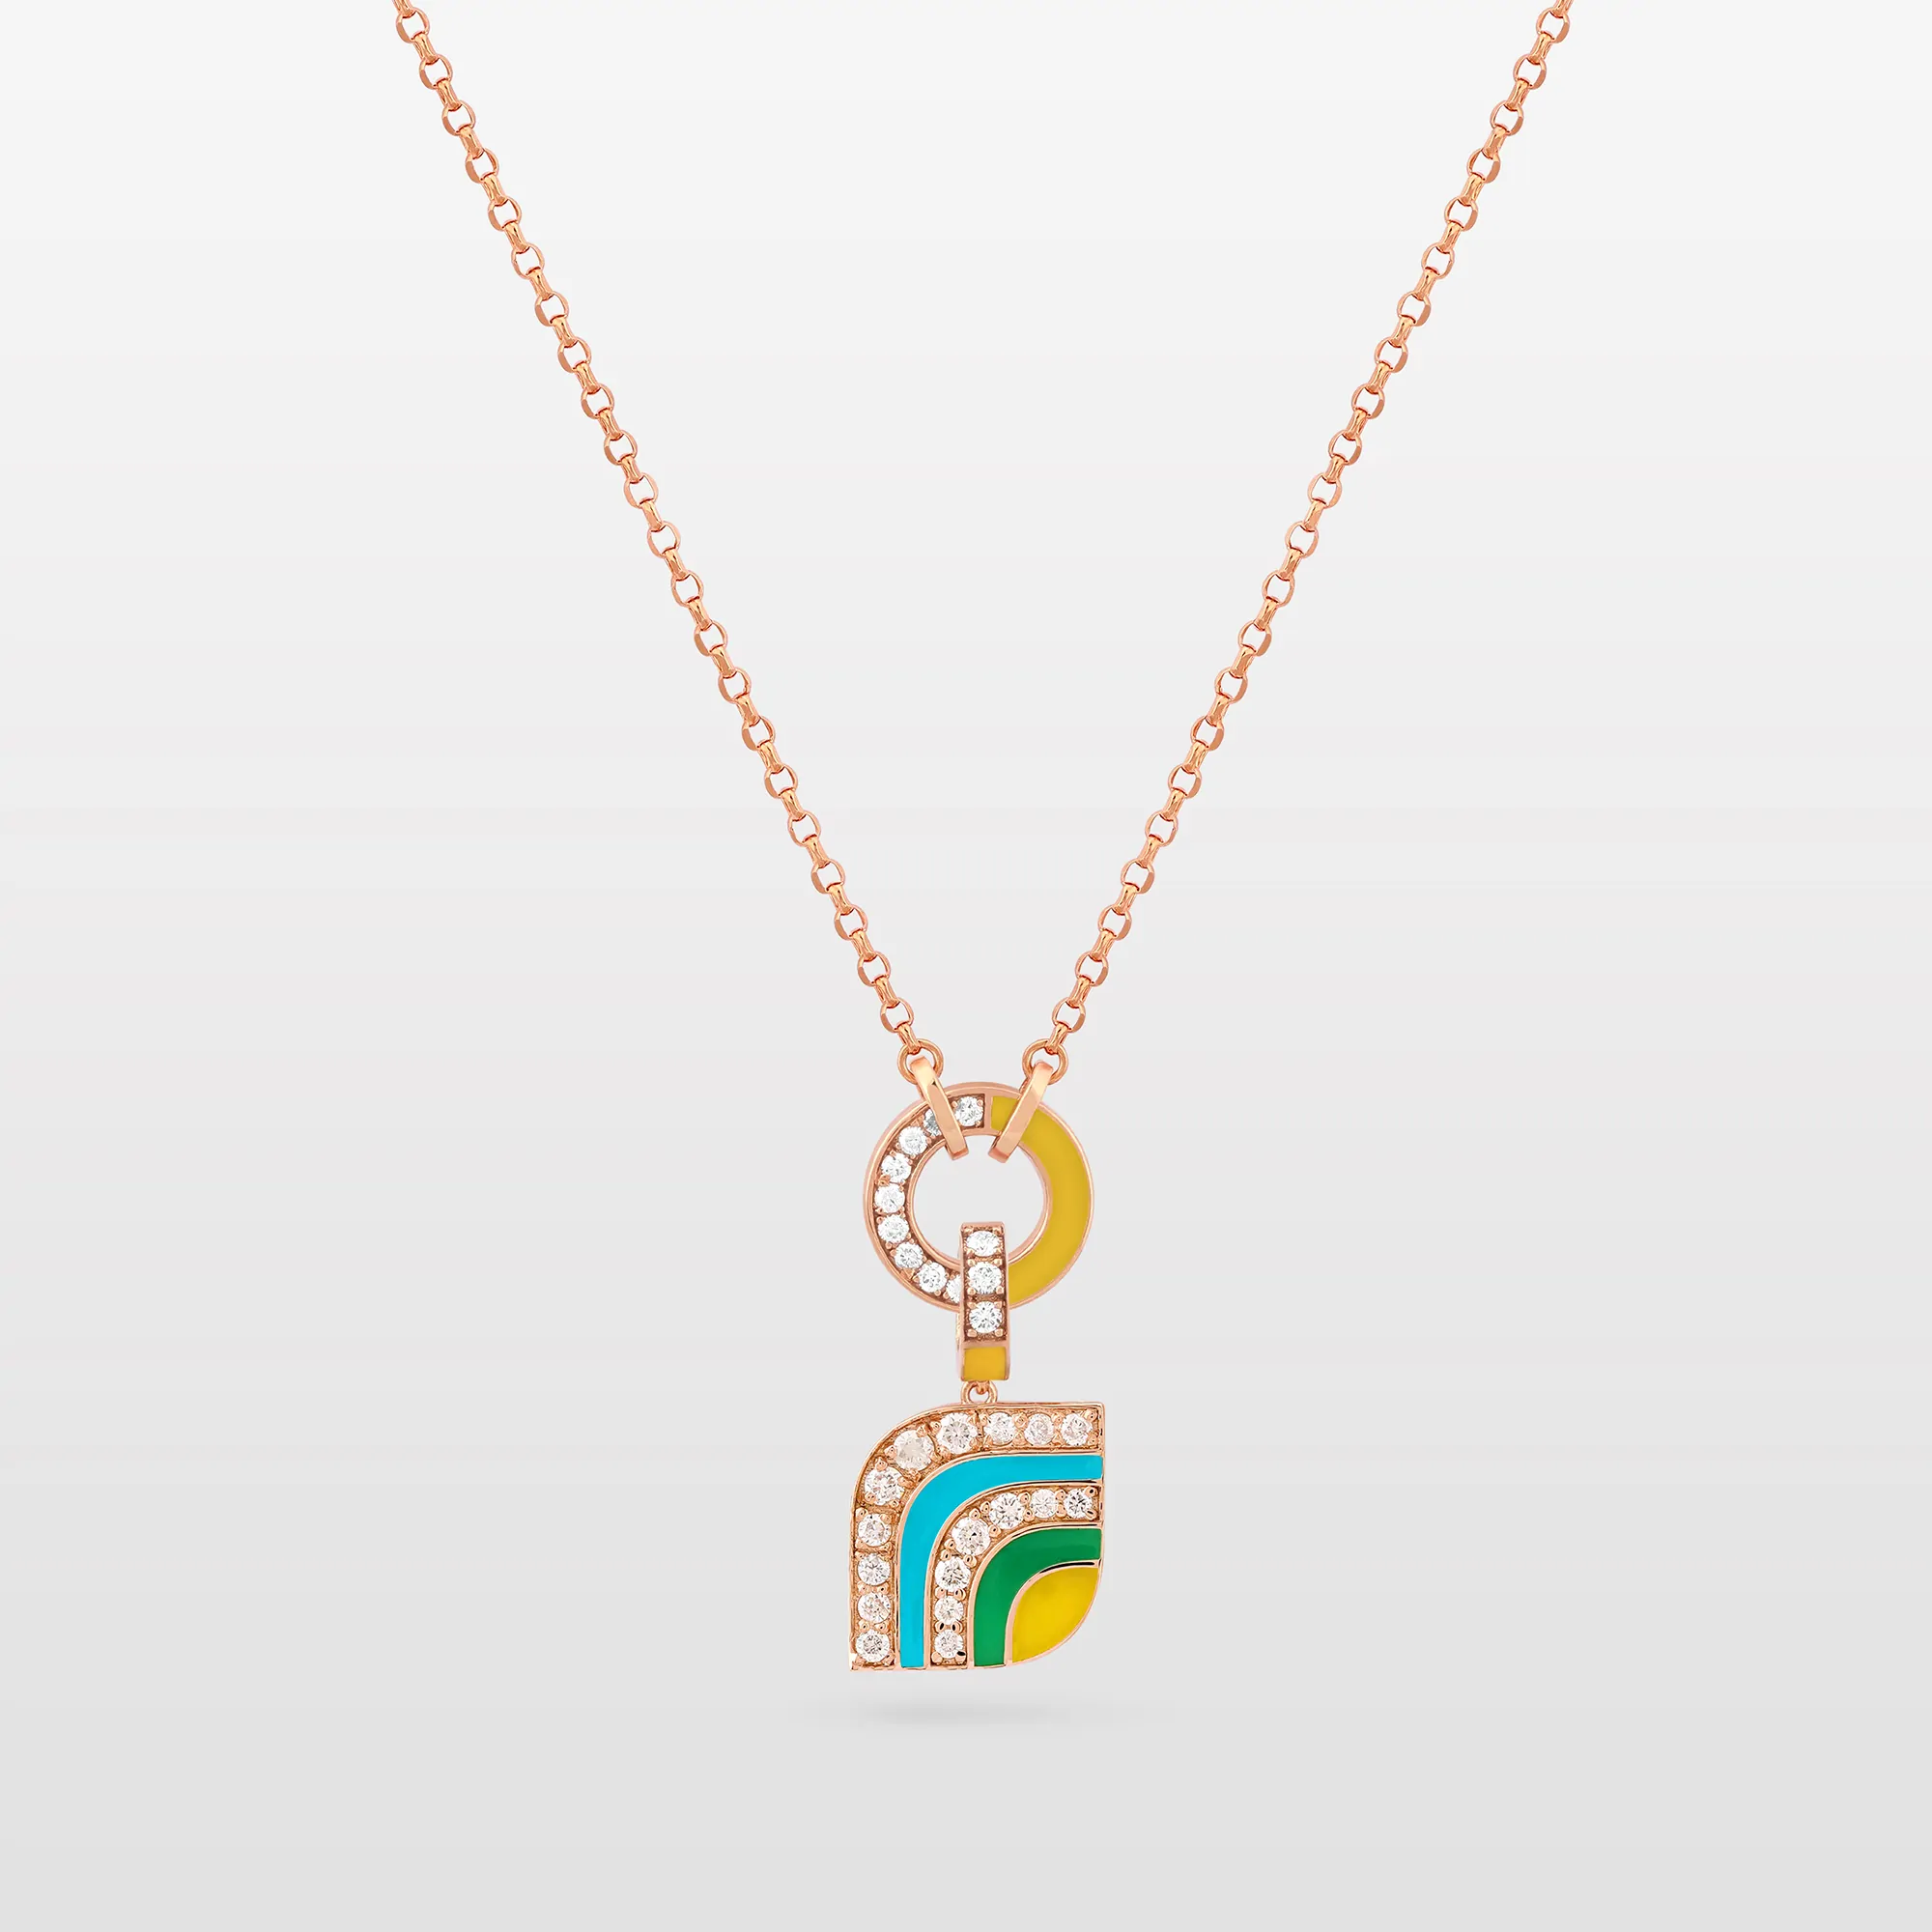 The Rainbow Connection Necklace